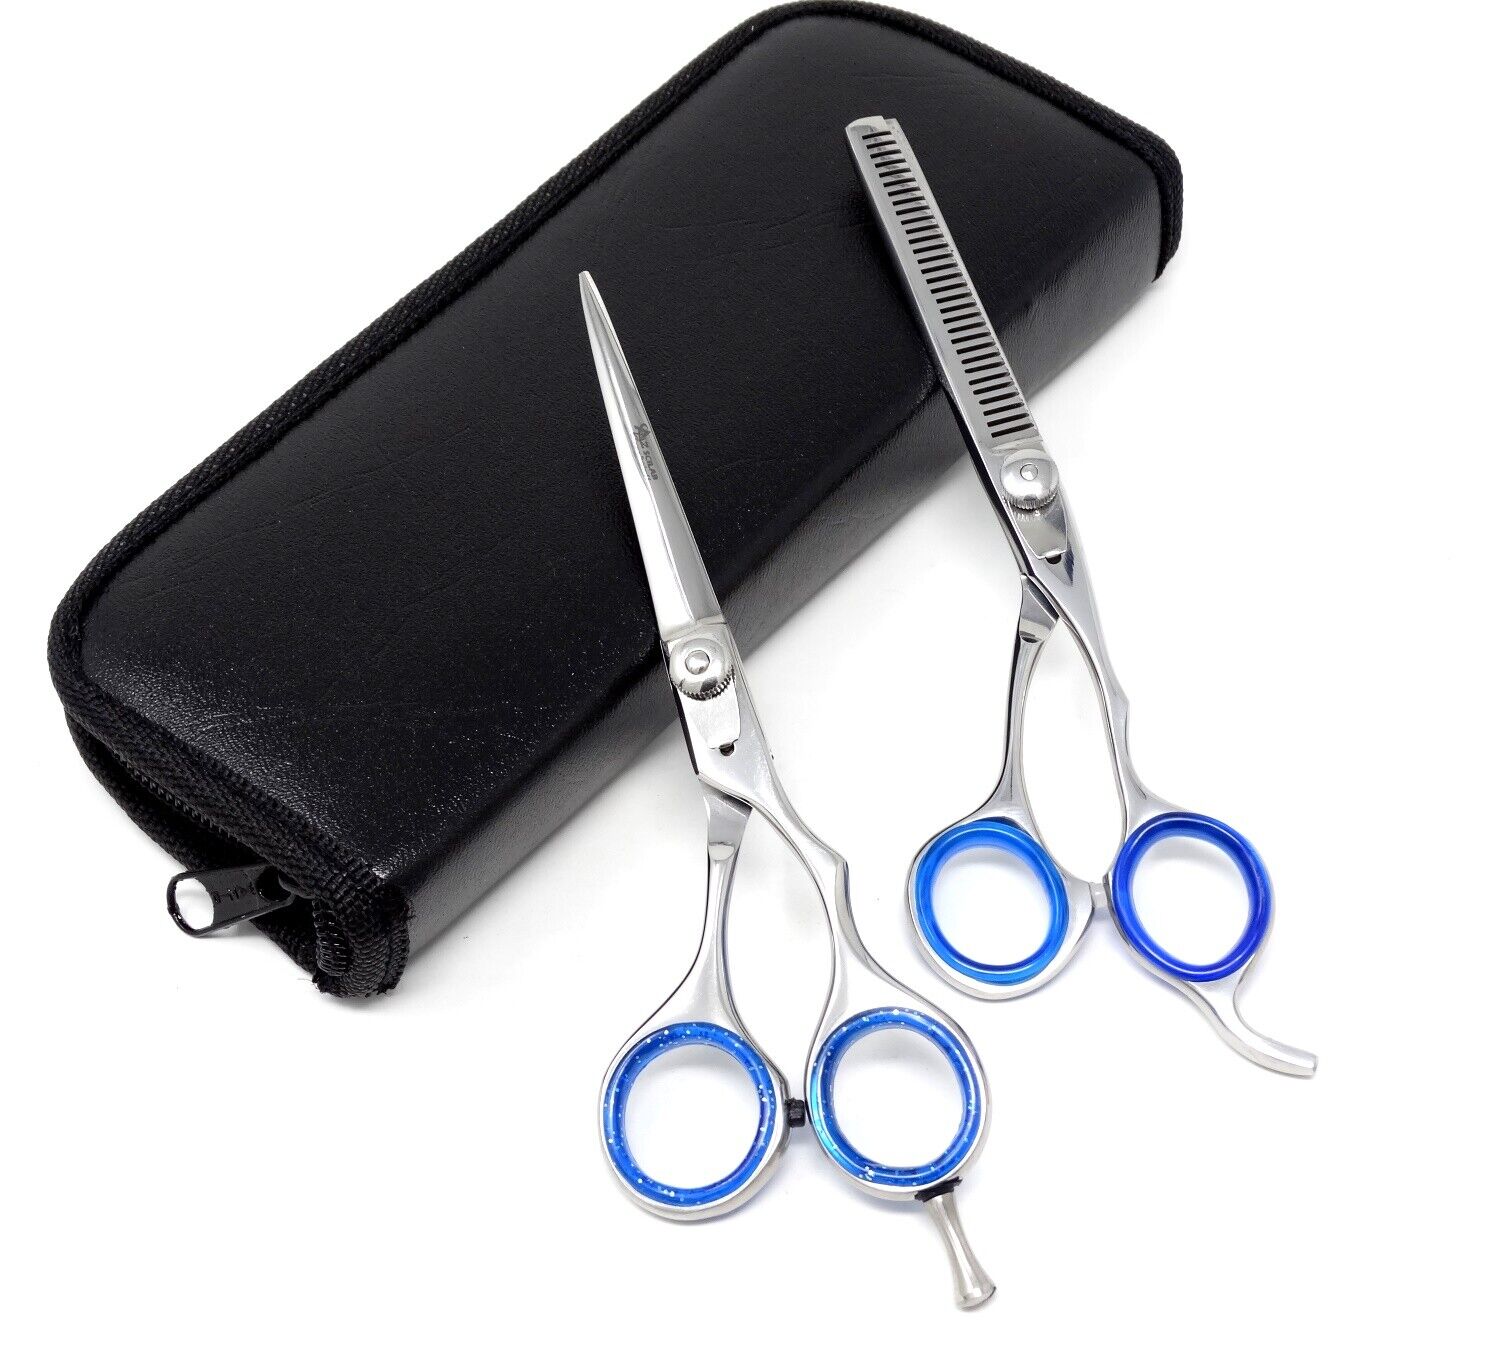 6" Professional Hair Cutting Japanese Scissors Thinning Barber Shears Set Kit A2Z SCILAB Does Not Apply